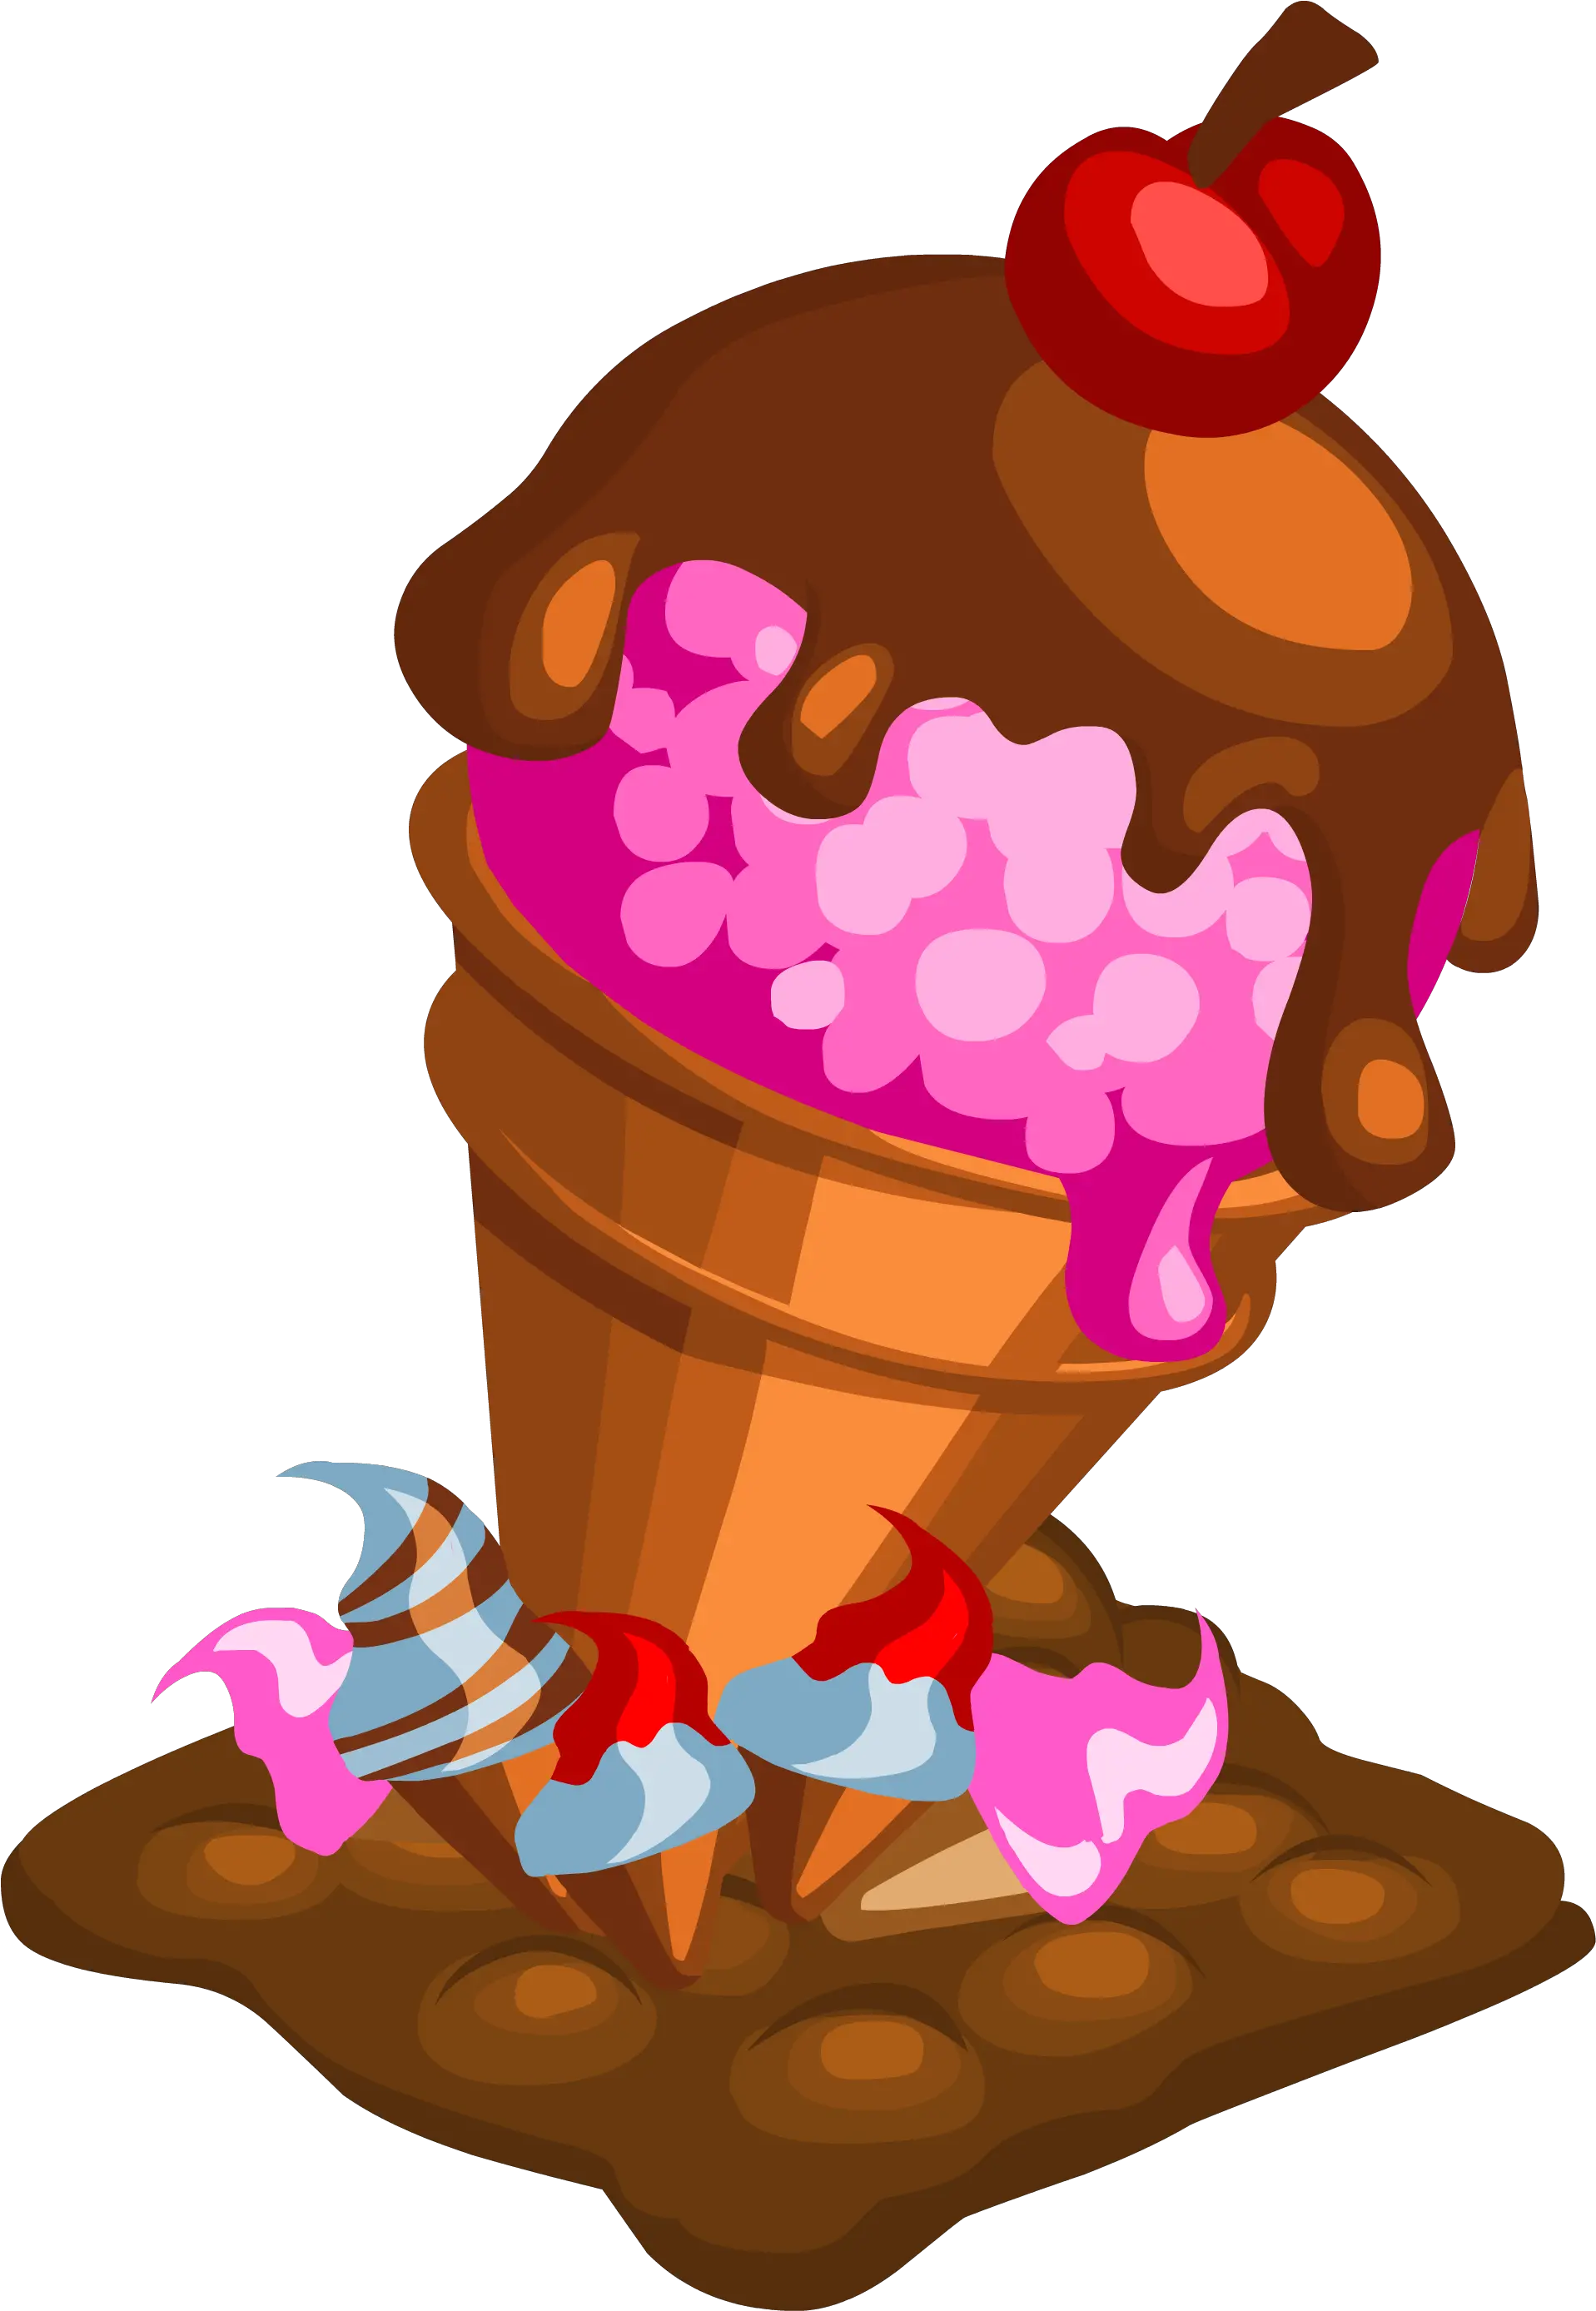 High Resolution Ice Cream Png Clipart 9400 Free Icons And Ice Cream Cone Cream Png